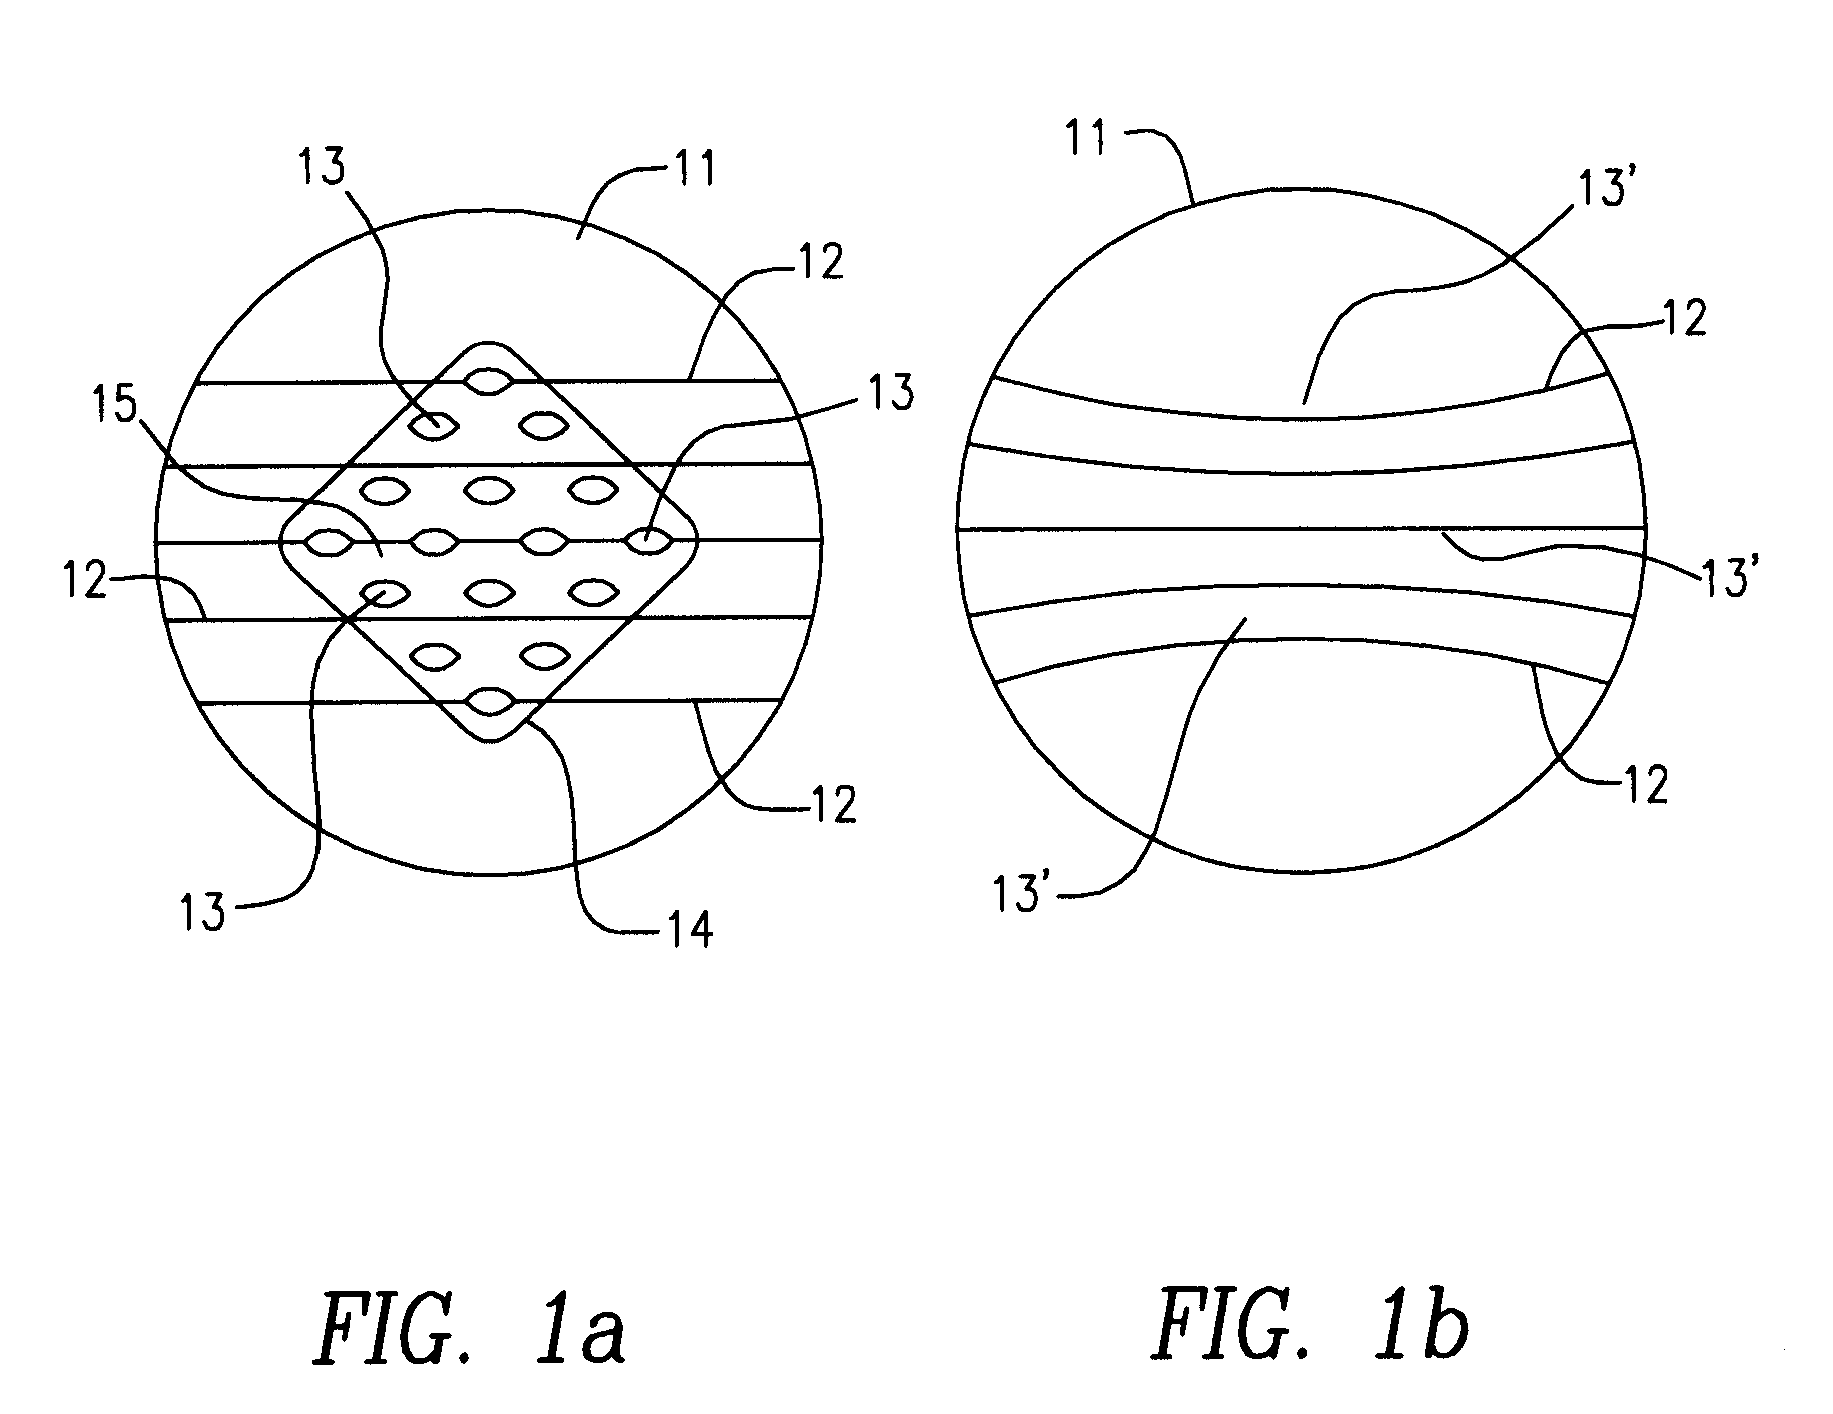 Method and apparatus for excising skin